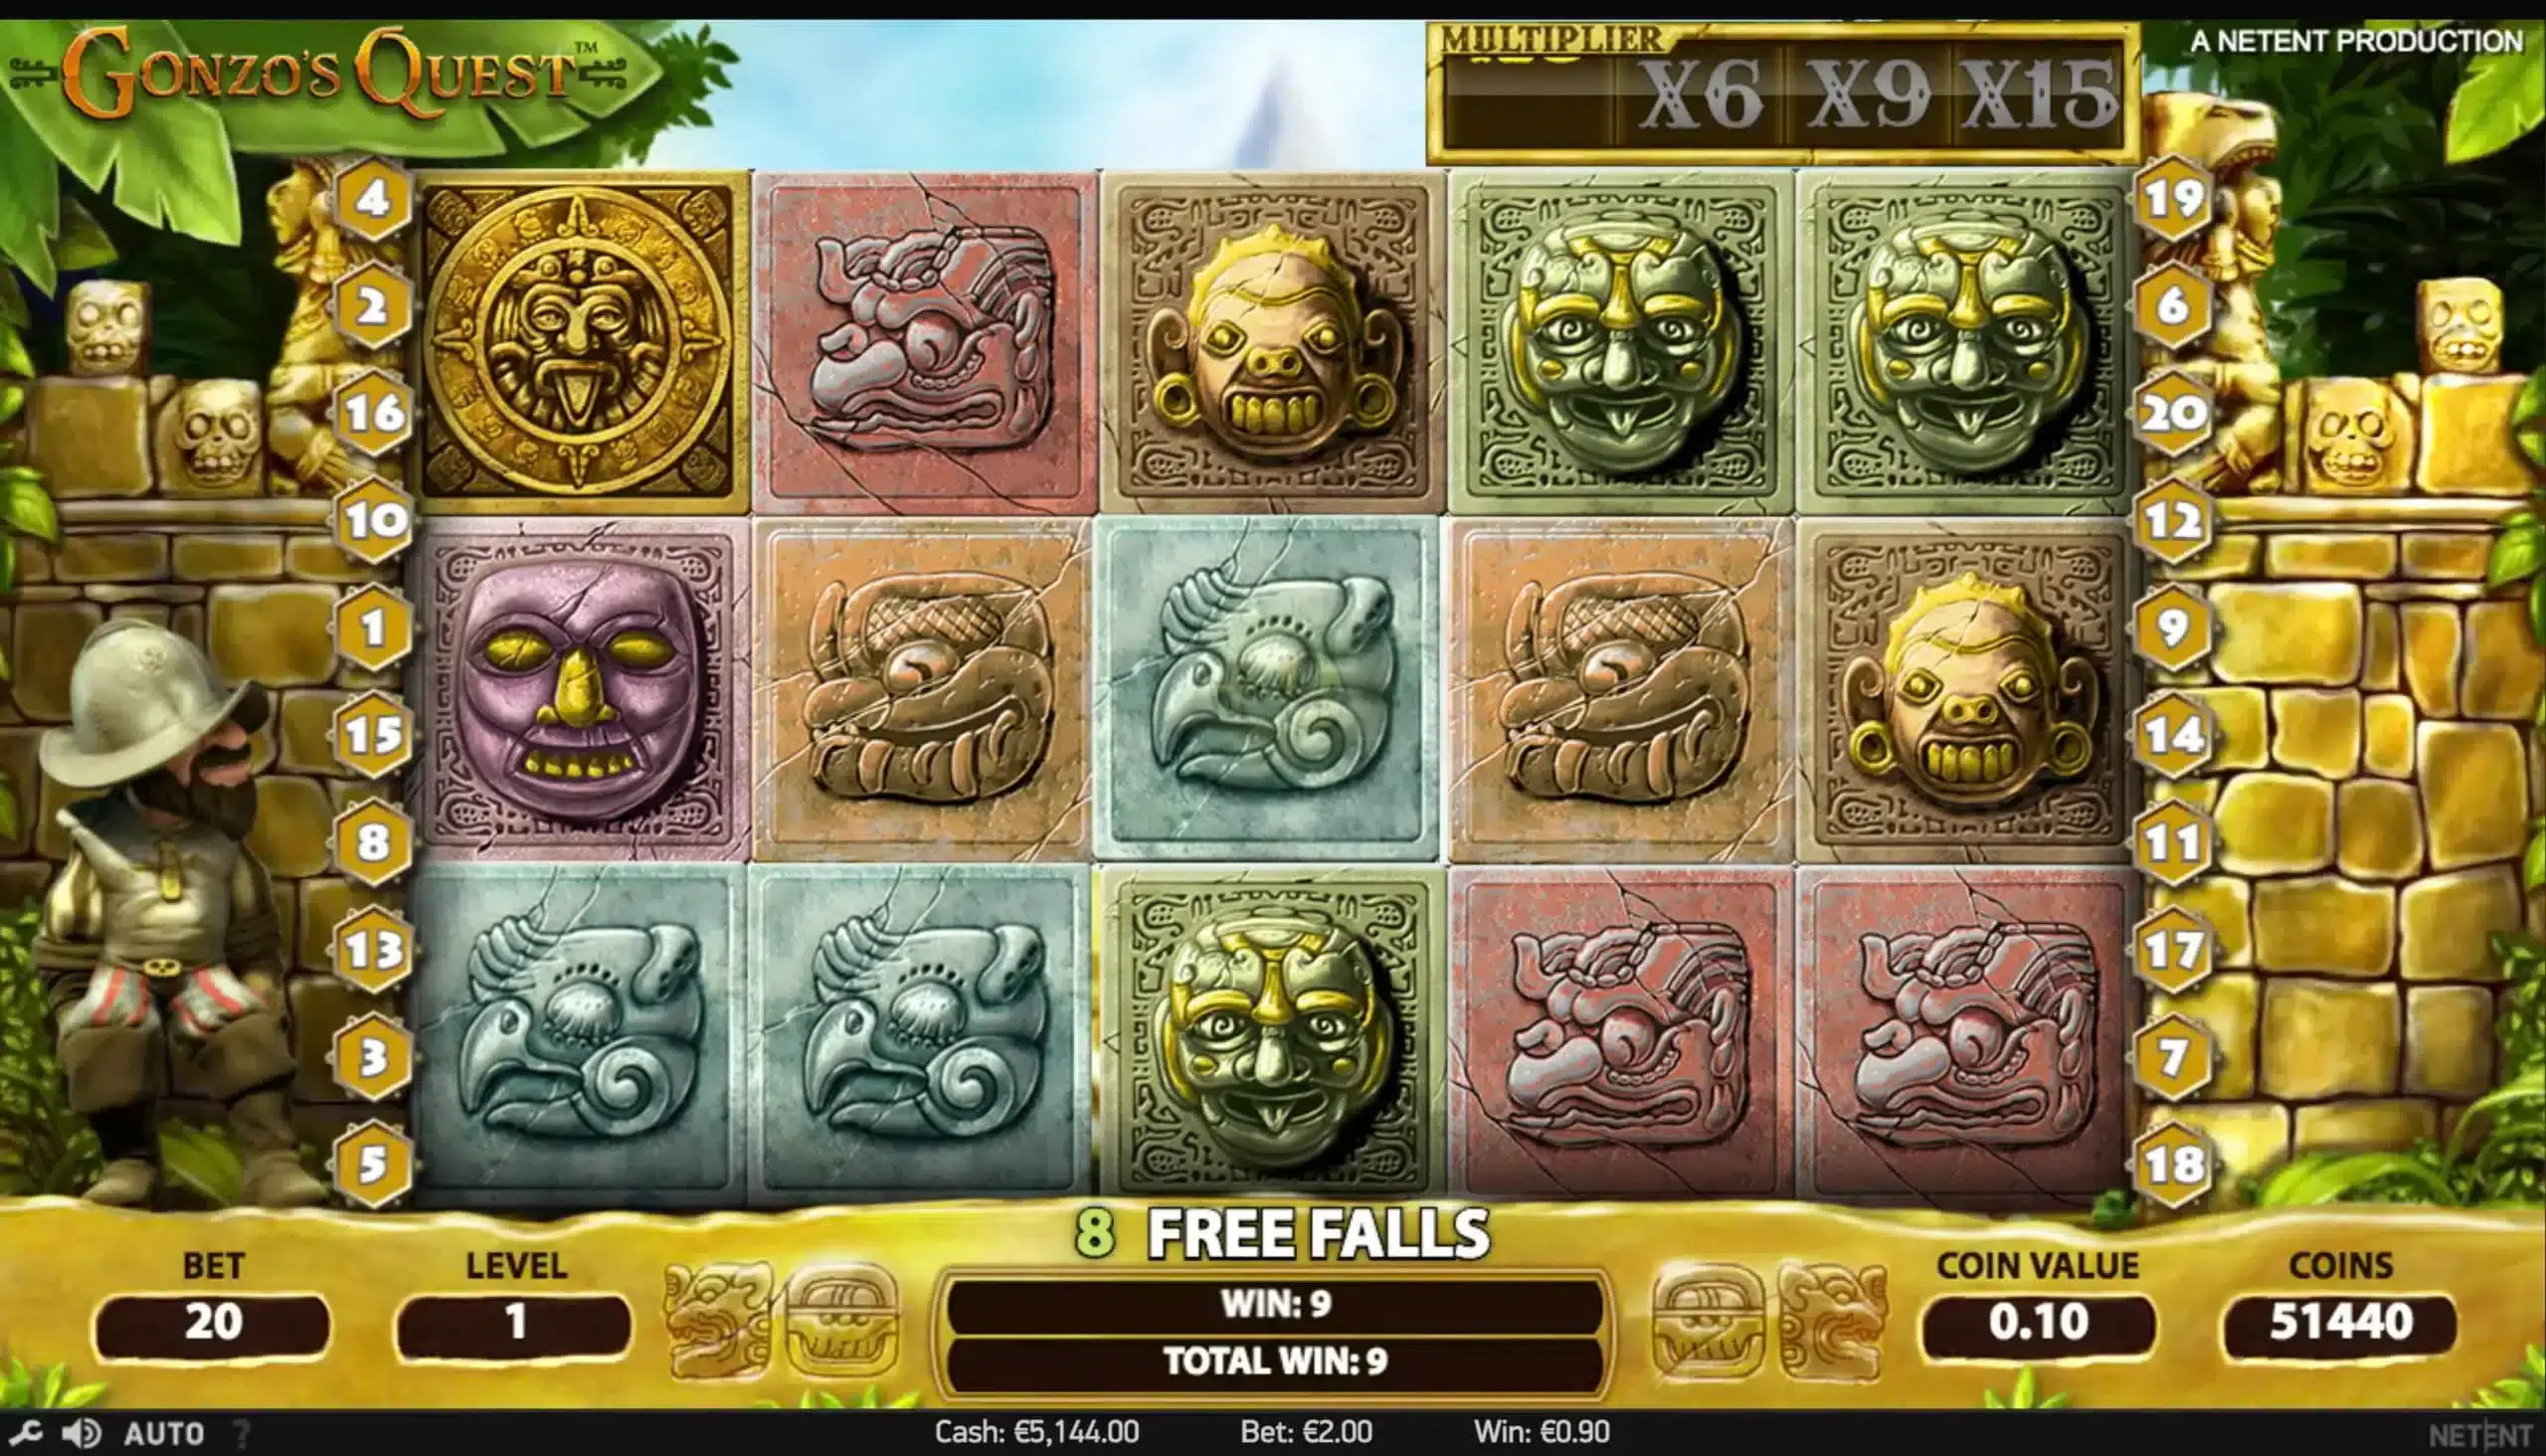 Gonzo's Quest Avalanche Multiplier - Emirates Casino Slot Review